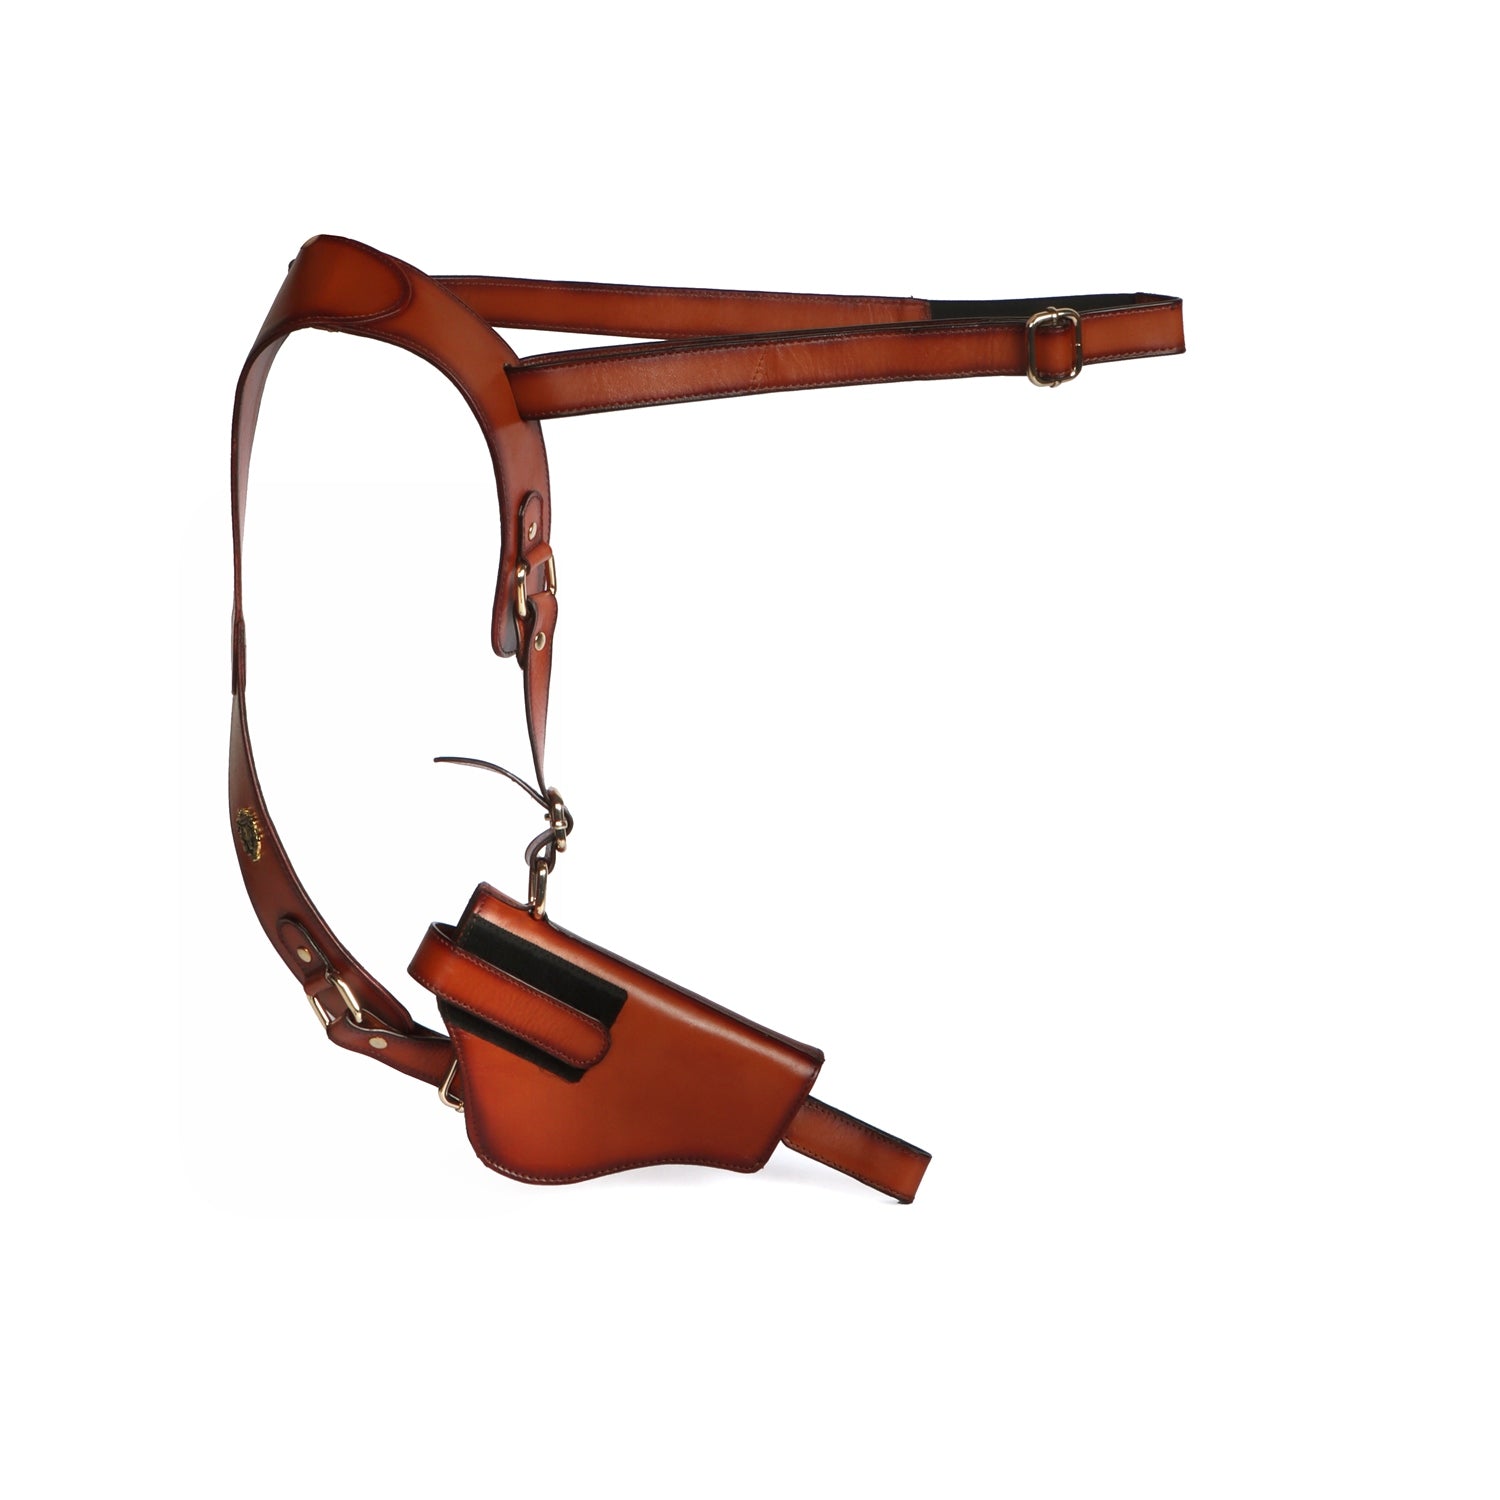 Single Shoulder .45 Gun Holster in Tan Genuine Leather with Velcro Strap (MTO)